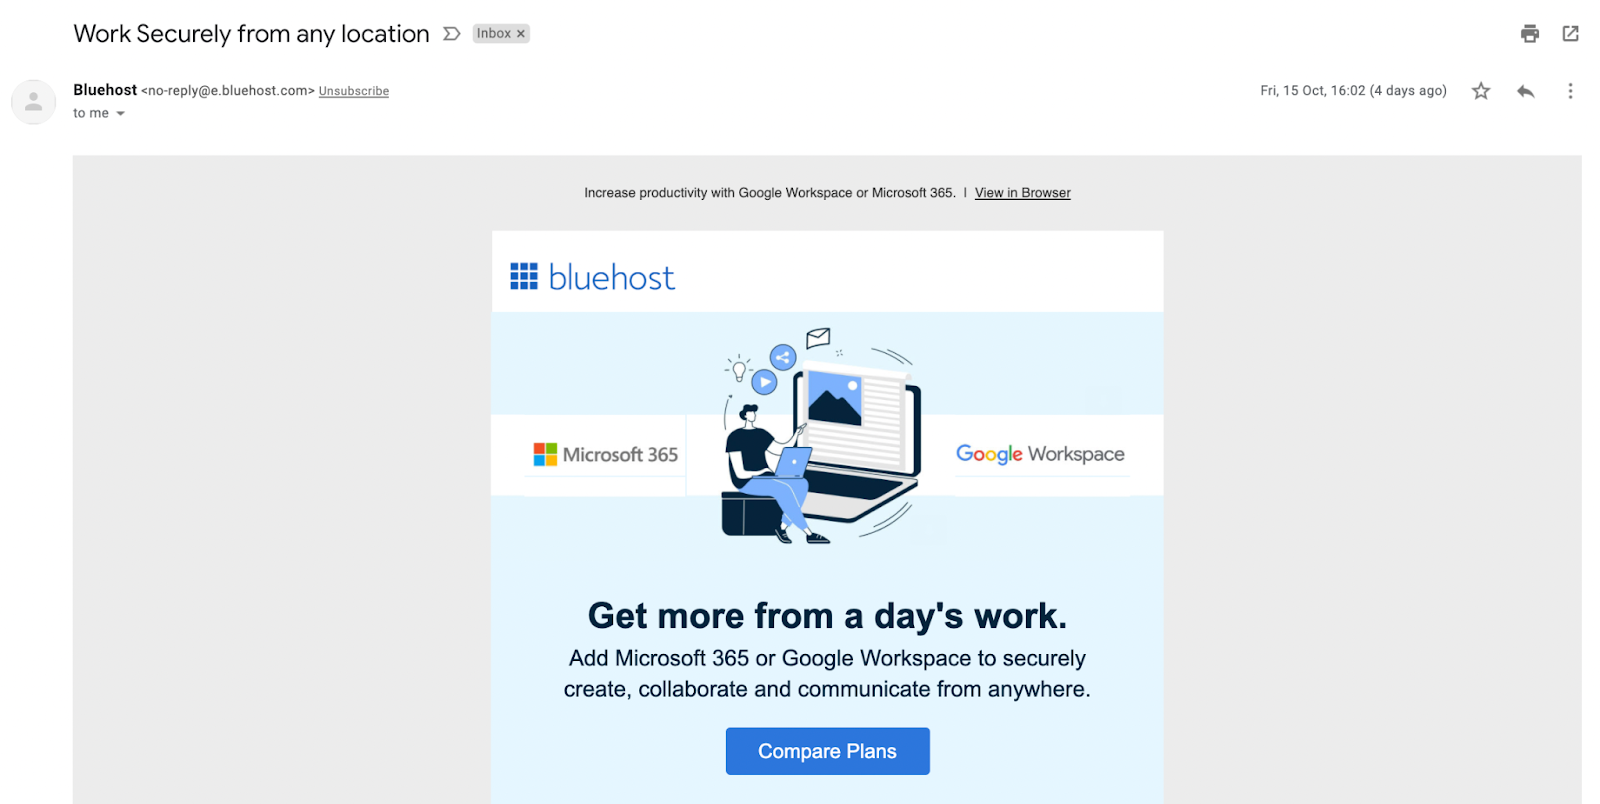 B2B Email Marketing Example From Bluehost